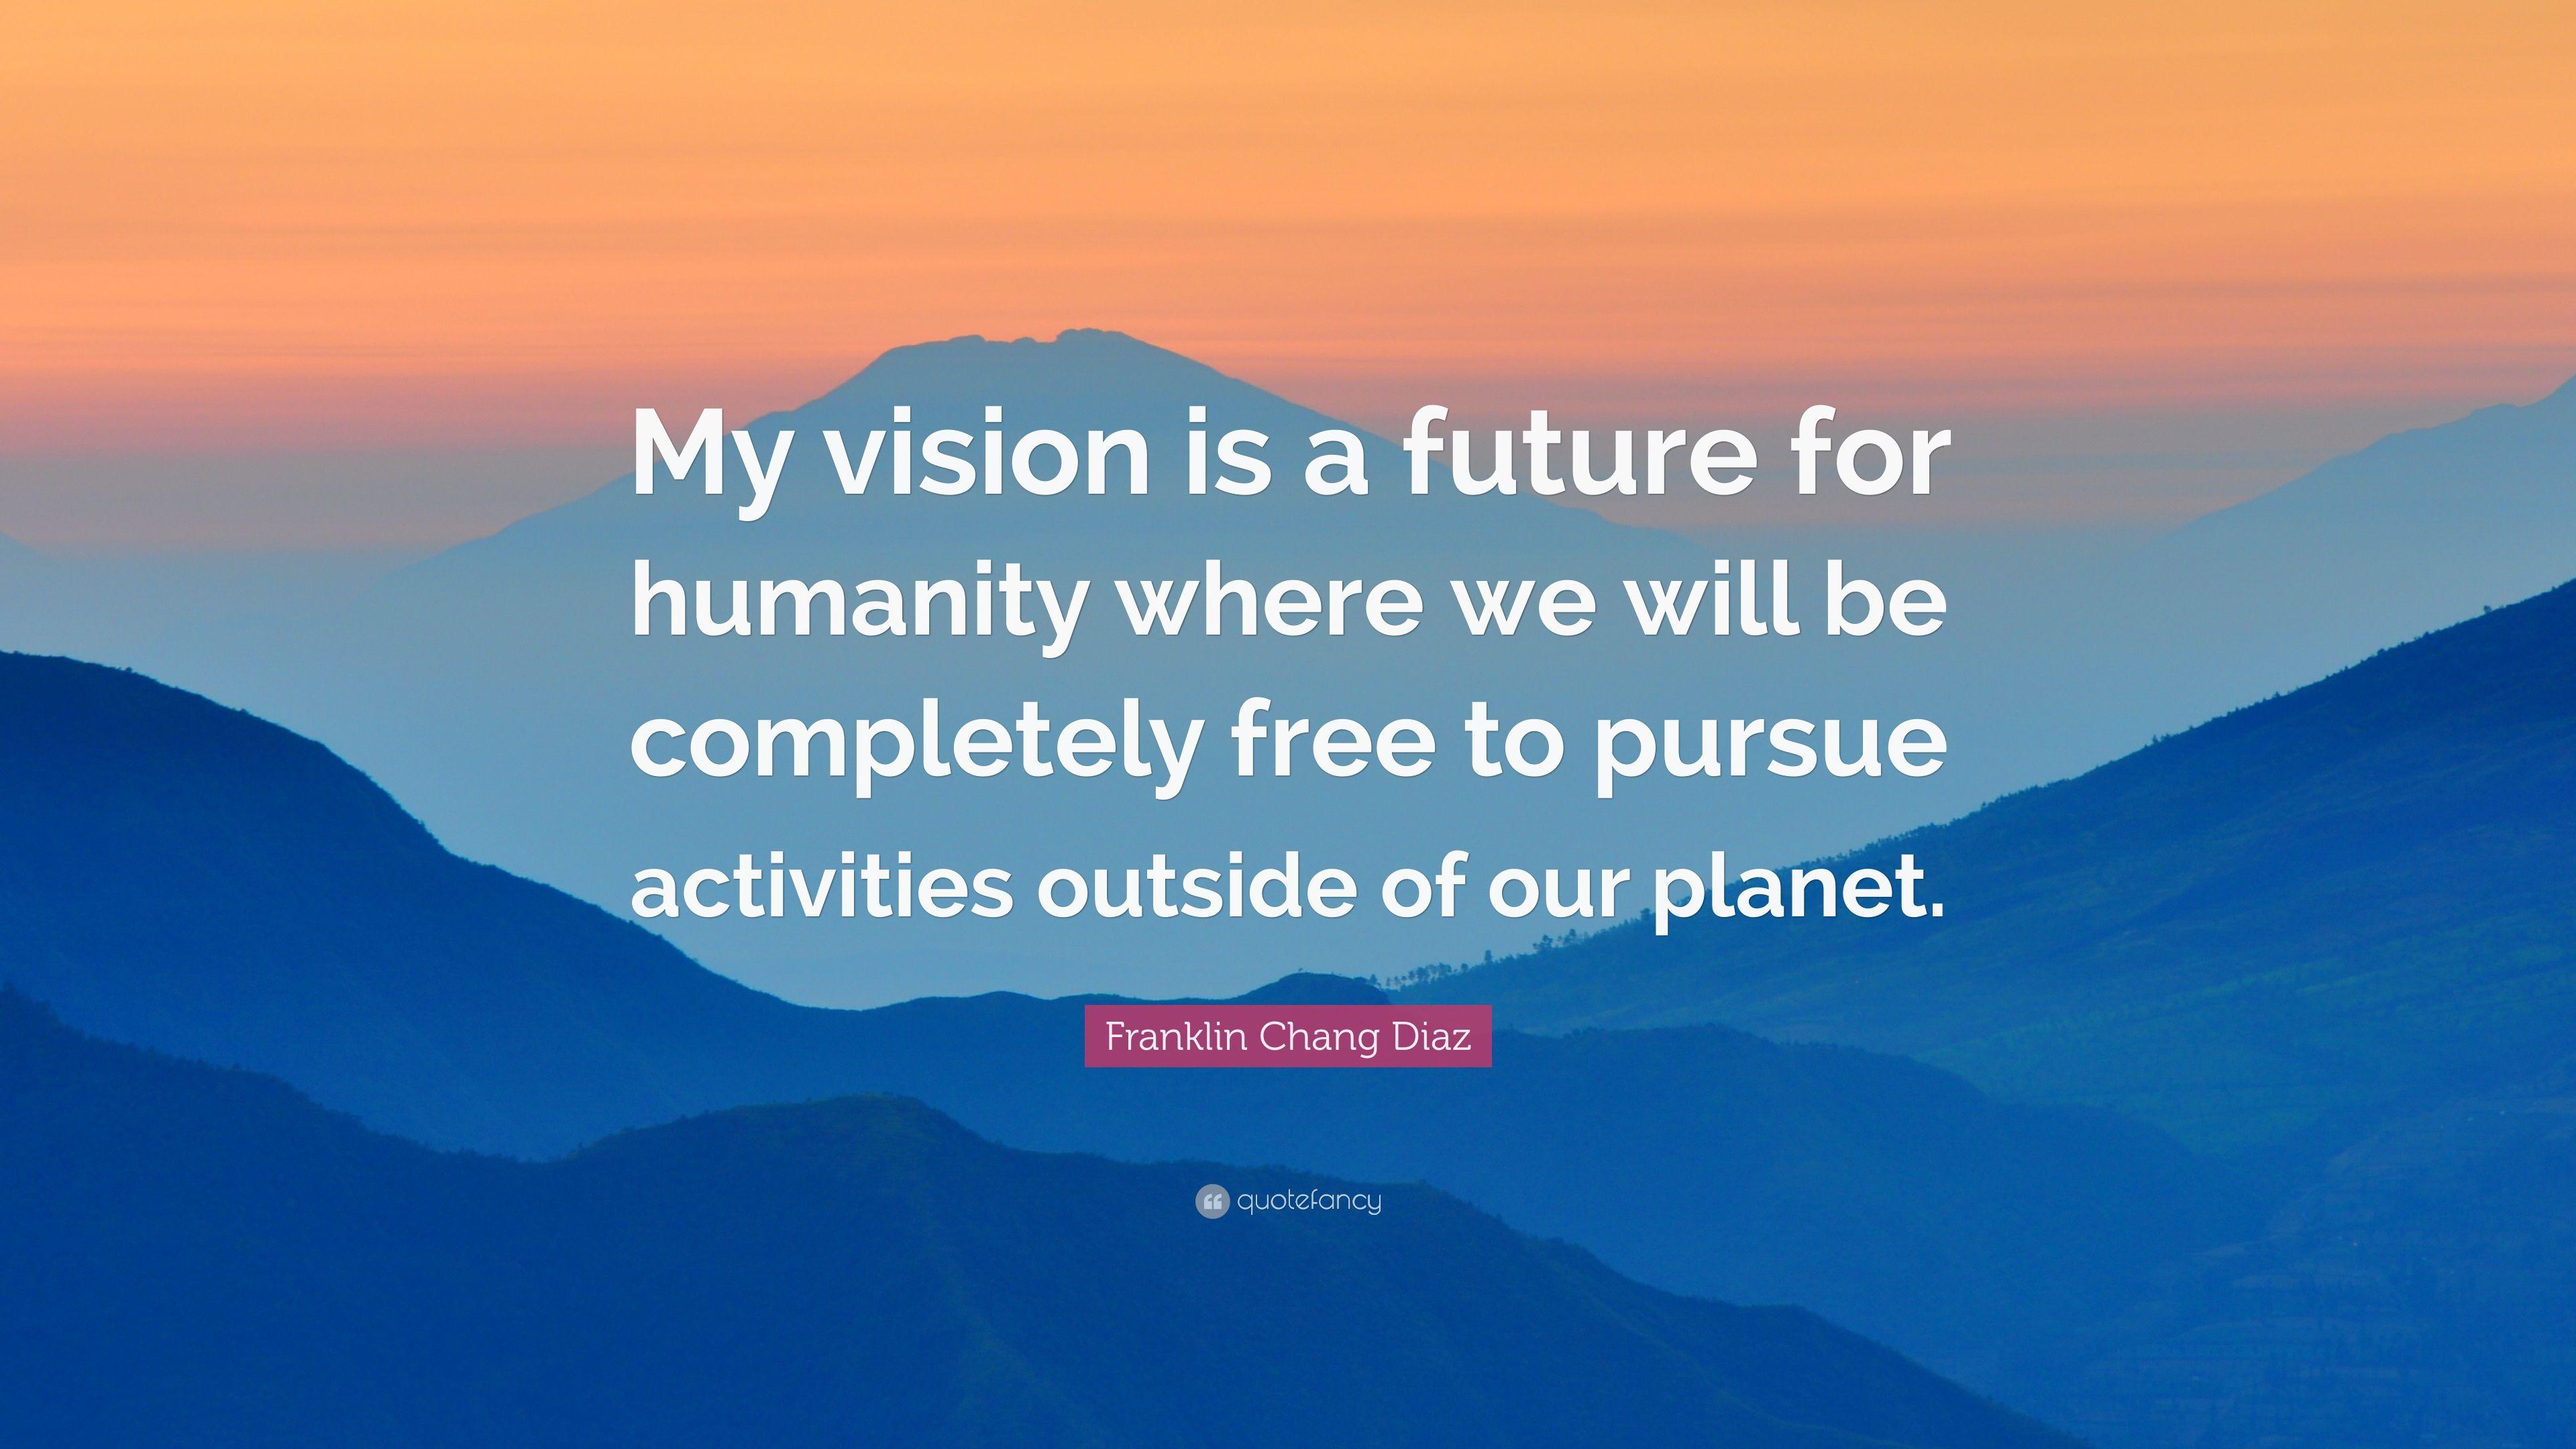 Franklin Chang Diaz Quote: “My vision is a future for humanity